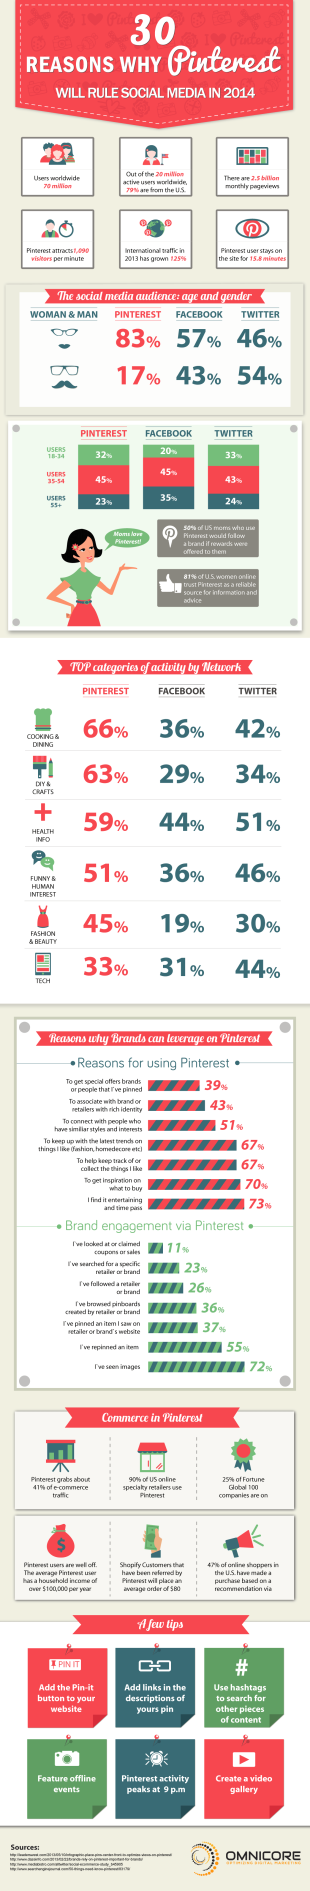 30 Reasons to Market Your Business on Pinterest in 2014 [Infographic] image Omnicore Pinterest Marketing 20141